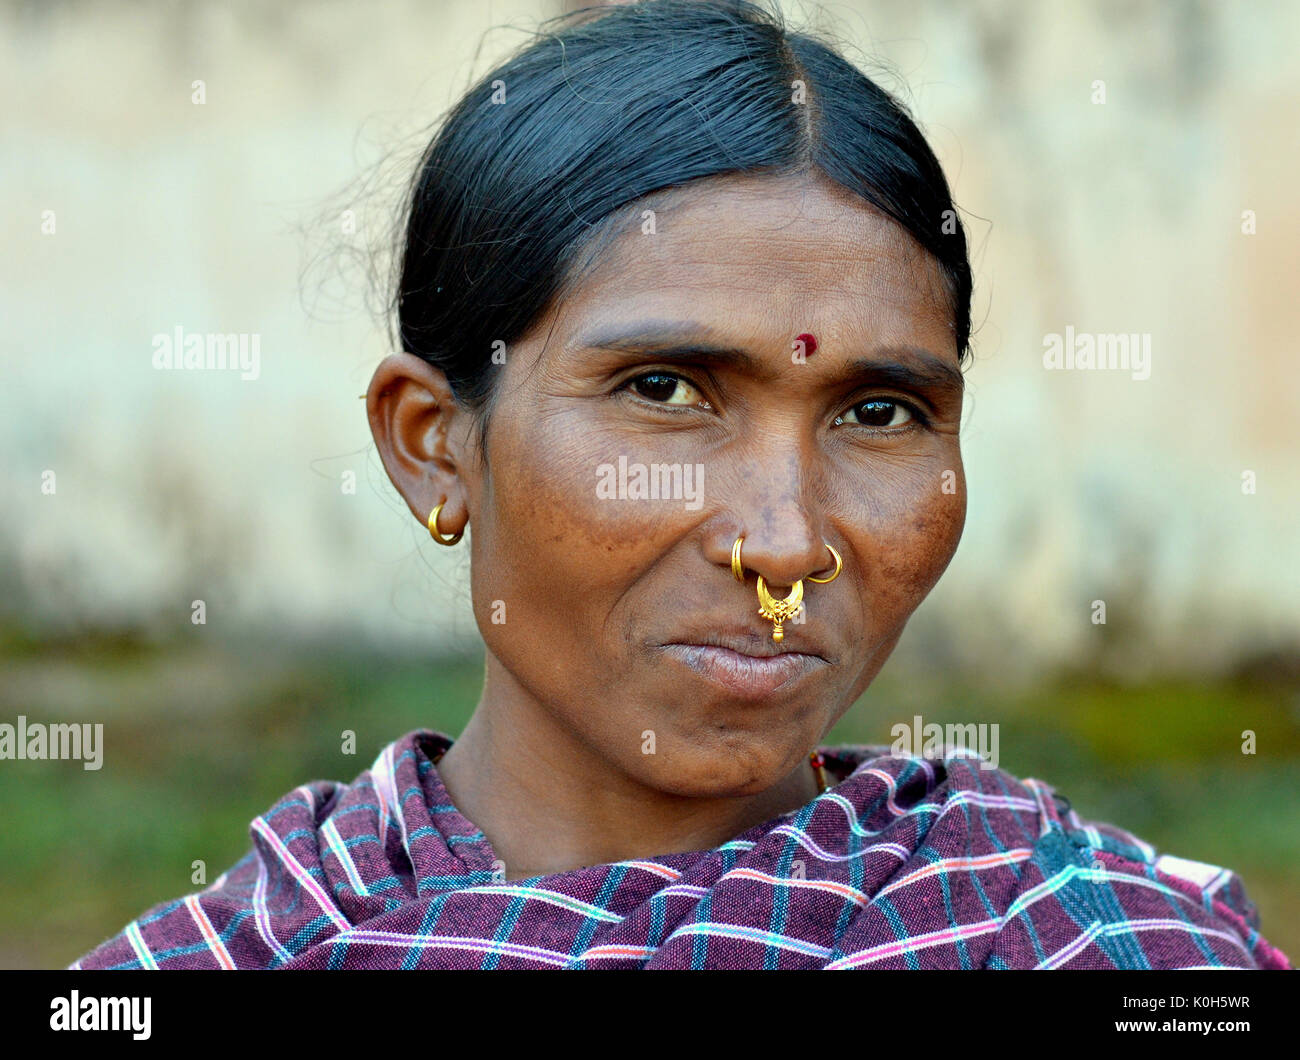 Indian Adivasi market woman with three golden nose rings, distinctive tribal earrings and a red bindi on her forehead poses for the camera. Stock Photo